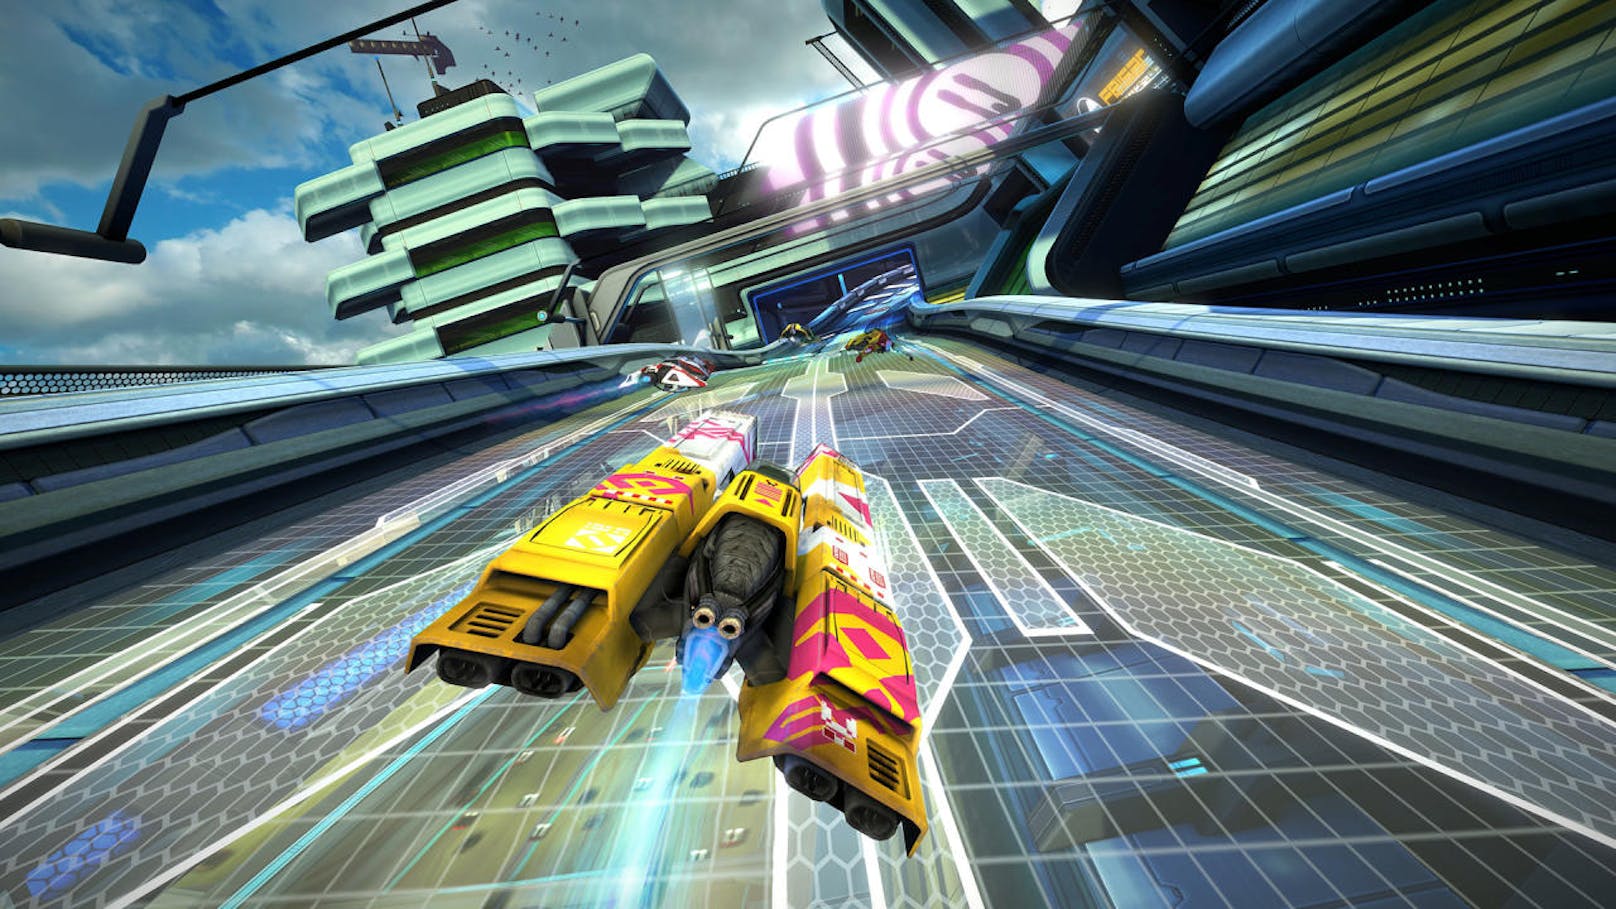  <a href="https://www.heute.at/digital/games/story/WipEout-Omega-Collection-im-Test--Schoen-schnell-57677095" target="_blank">WipEout Omega Collection</a>